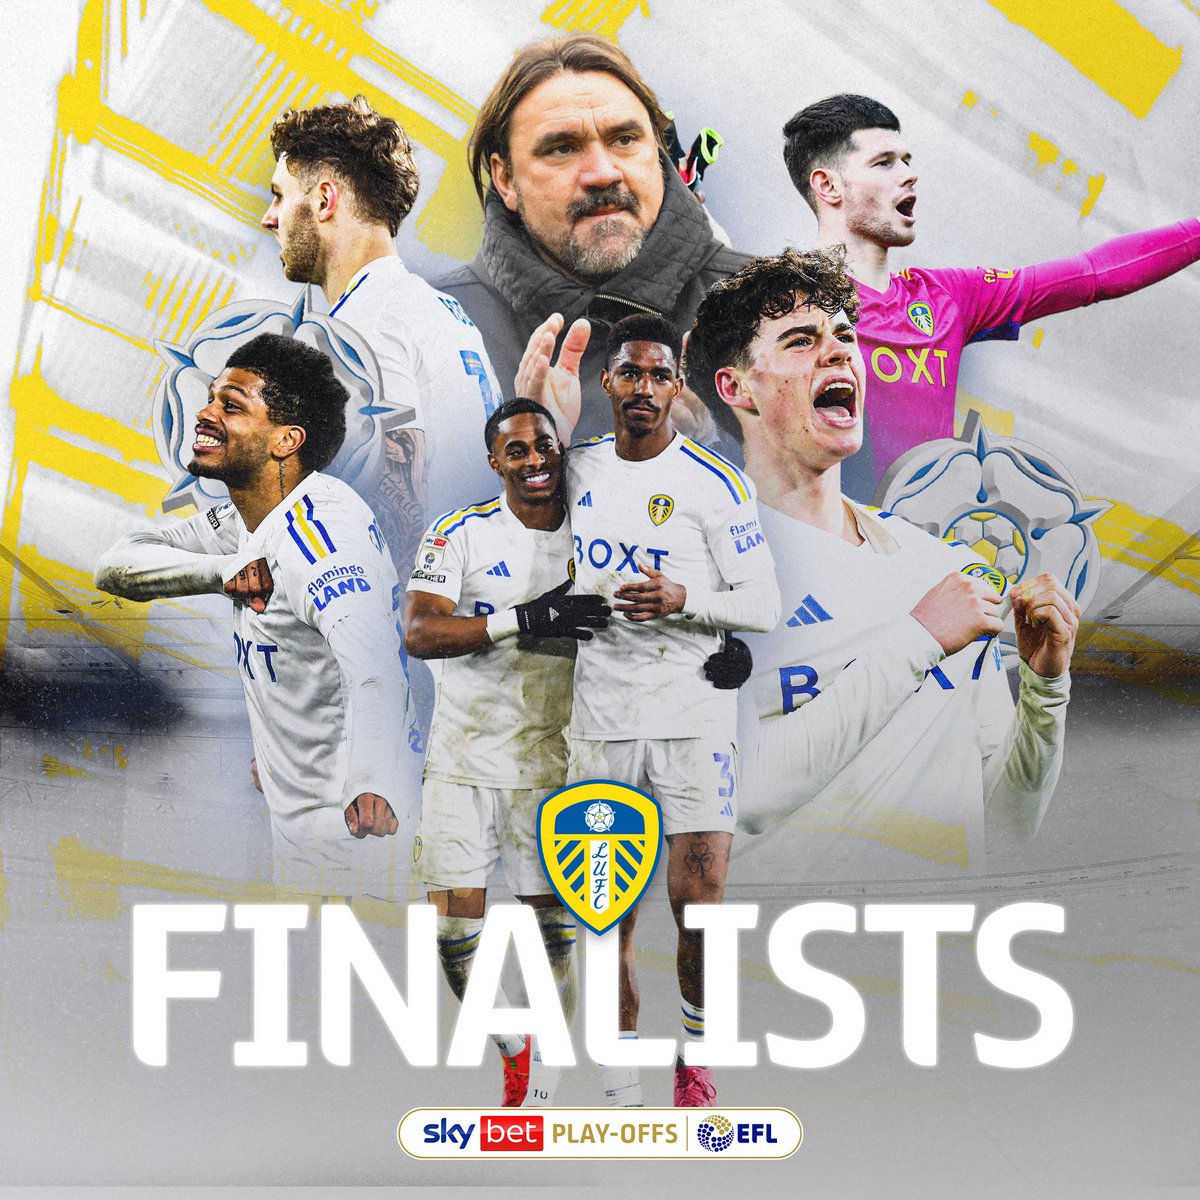 #alaw Wembley here we come!